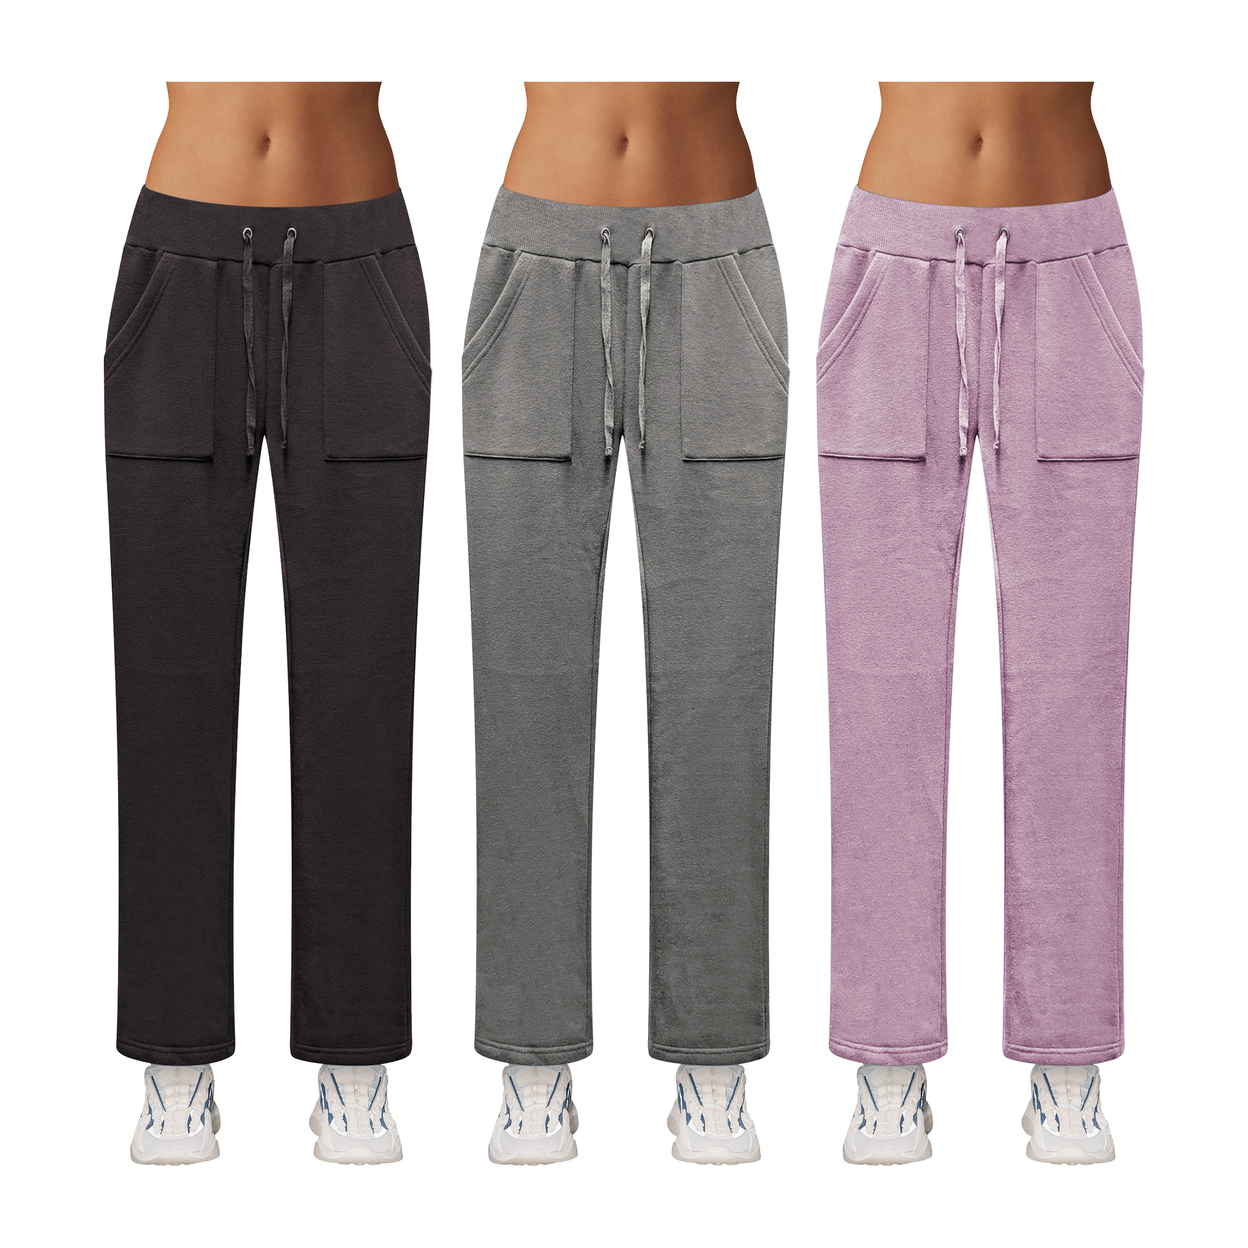 Multi-Pack: Women's Ultra-Soft Cozy Fleece Lined Elastic Waistband Terry Knit Pants - 1-Pack, Large